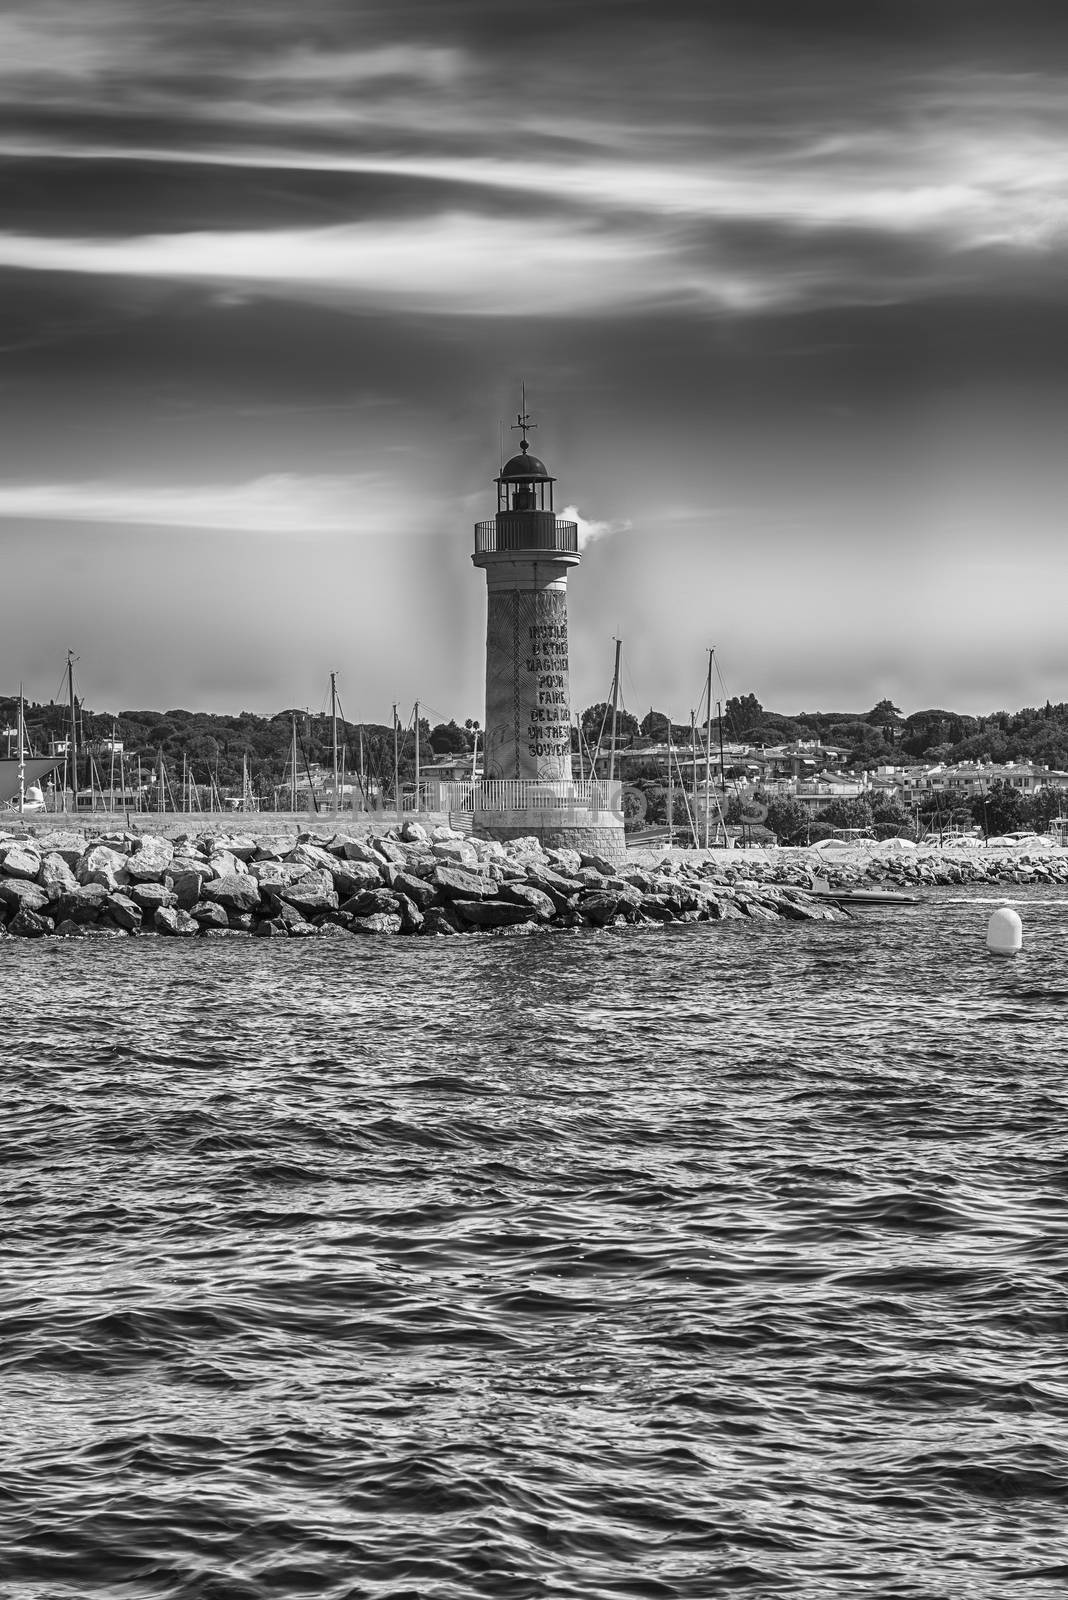 The iconic lighthouse in the harbor of Saint-Tropez, Cote d'Azur, France. The written reads 'no need to be a magician to make the sea a sovereign treasure'